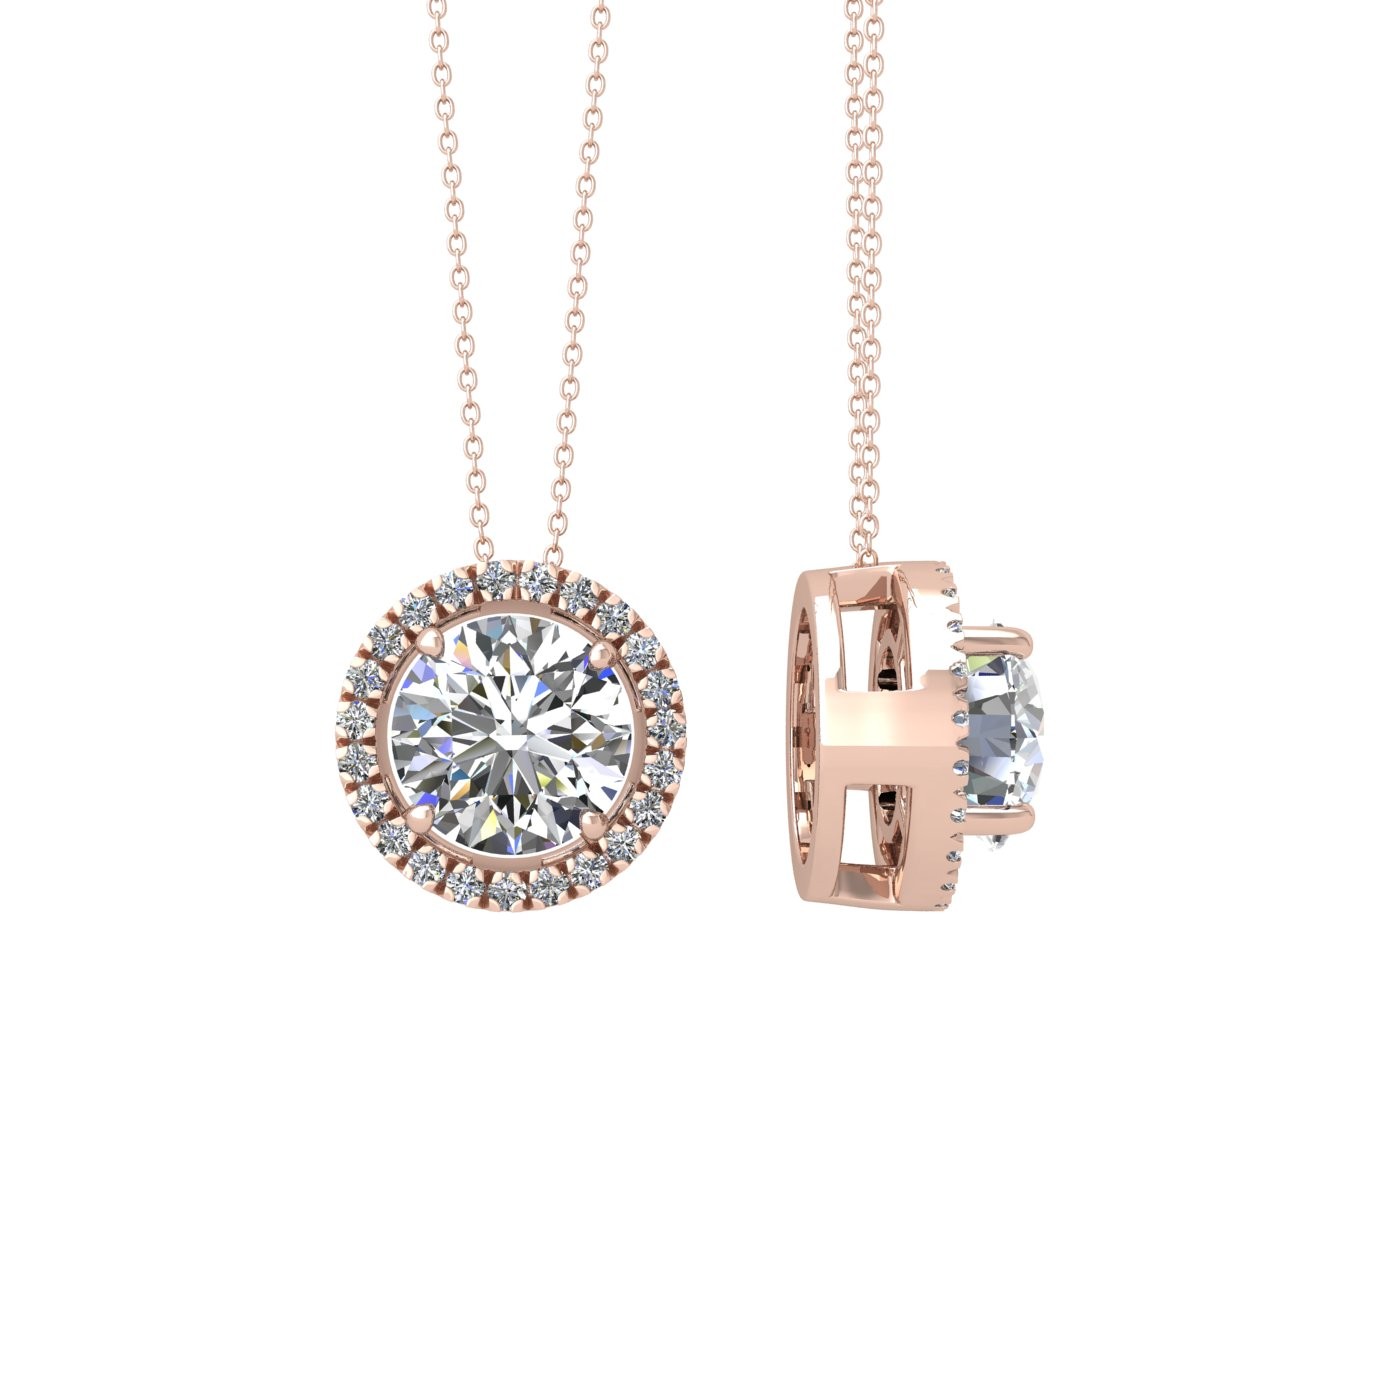 18k rose gold  1,2 ct 4 prong round shape diamond pendant with diamond pavÉ set halo including chain seperate from the pendant Photos & images